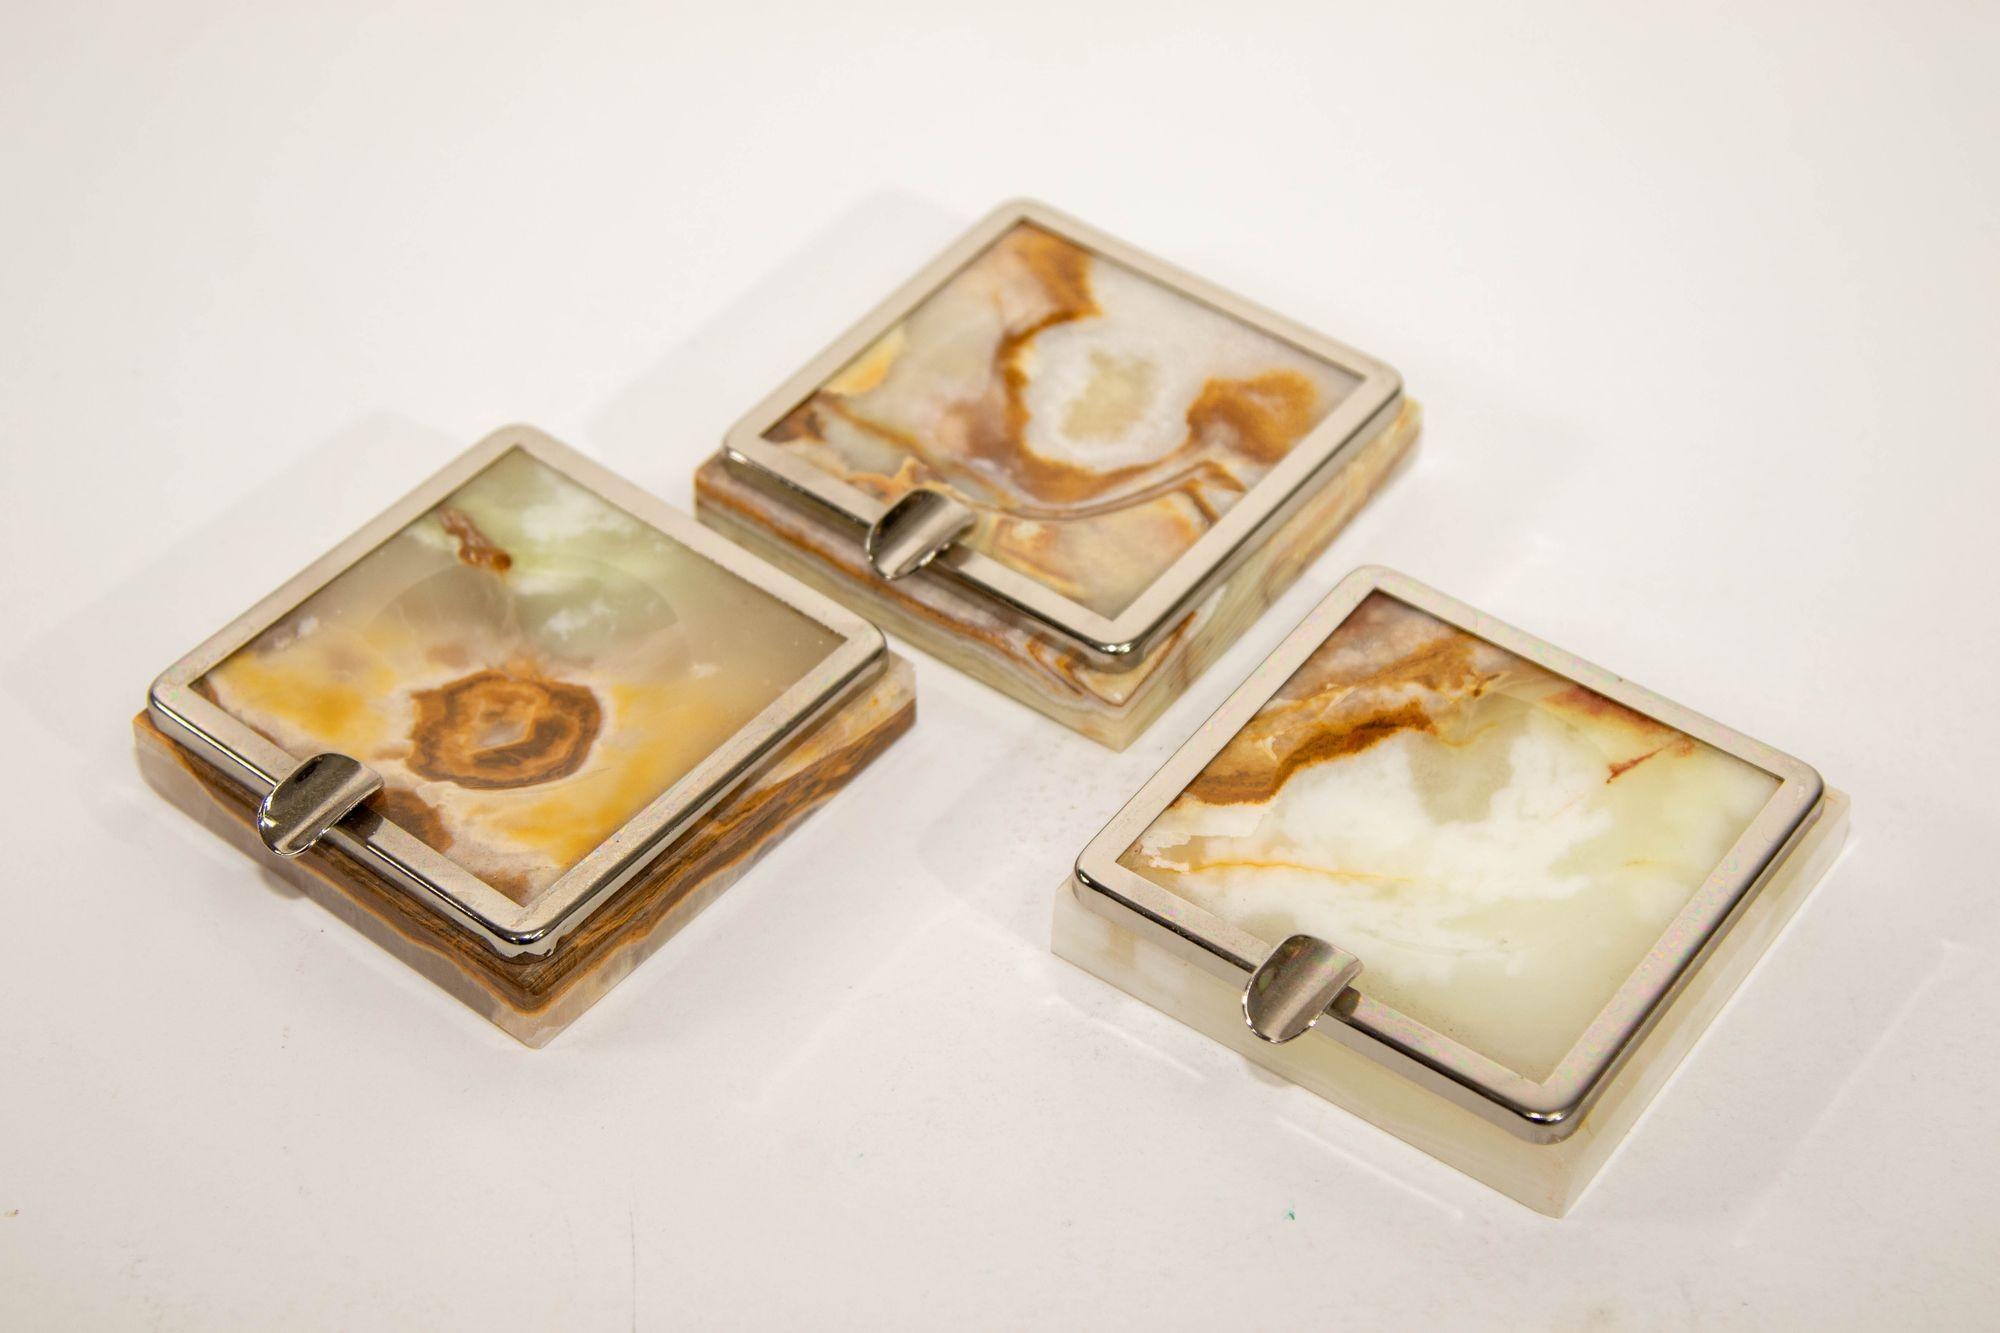 Onyx Art Deco Ashtrays Set of Three 1960 Made in Italy
Vintage set of three small onyx green ashtrays with silver white metal accent.
Elegant vintage ashtray made of precious white, brown and green onyx.
Mid-20th century stylish Art Deco green and